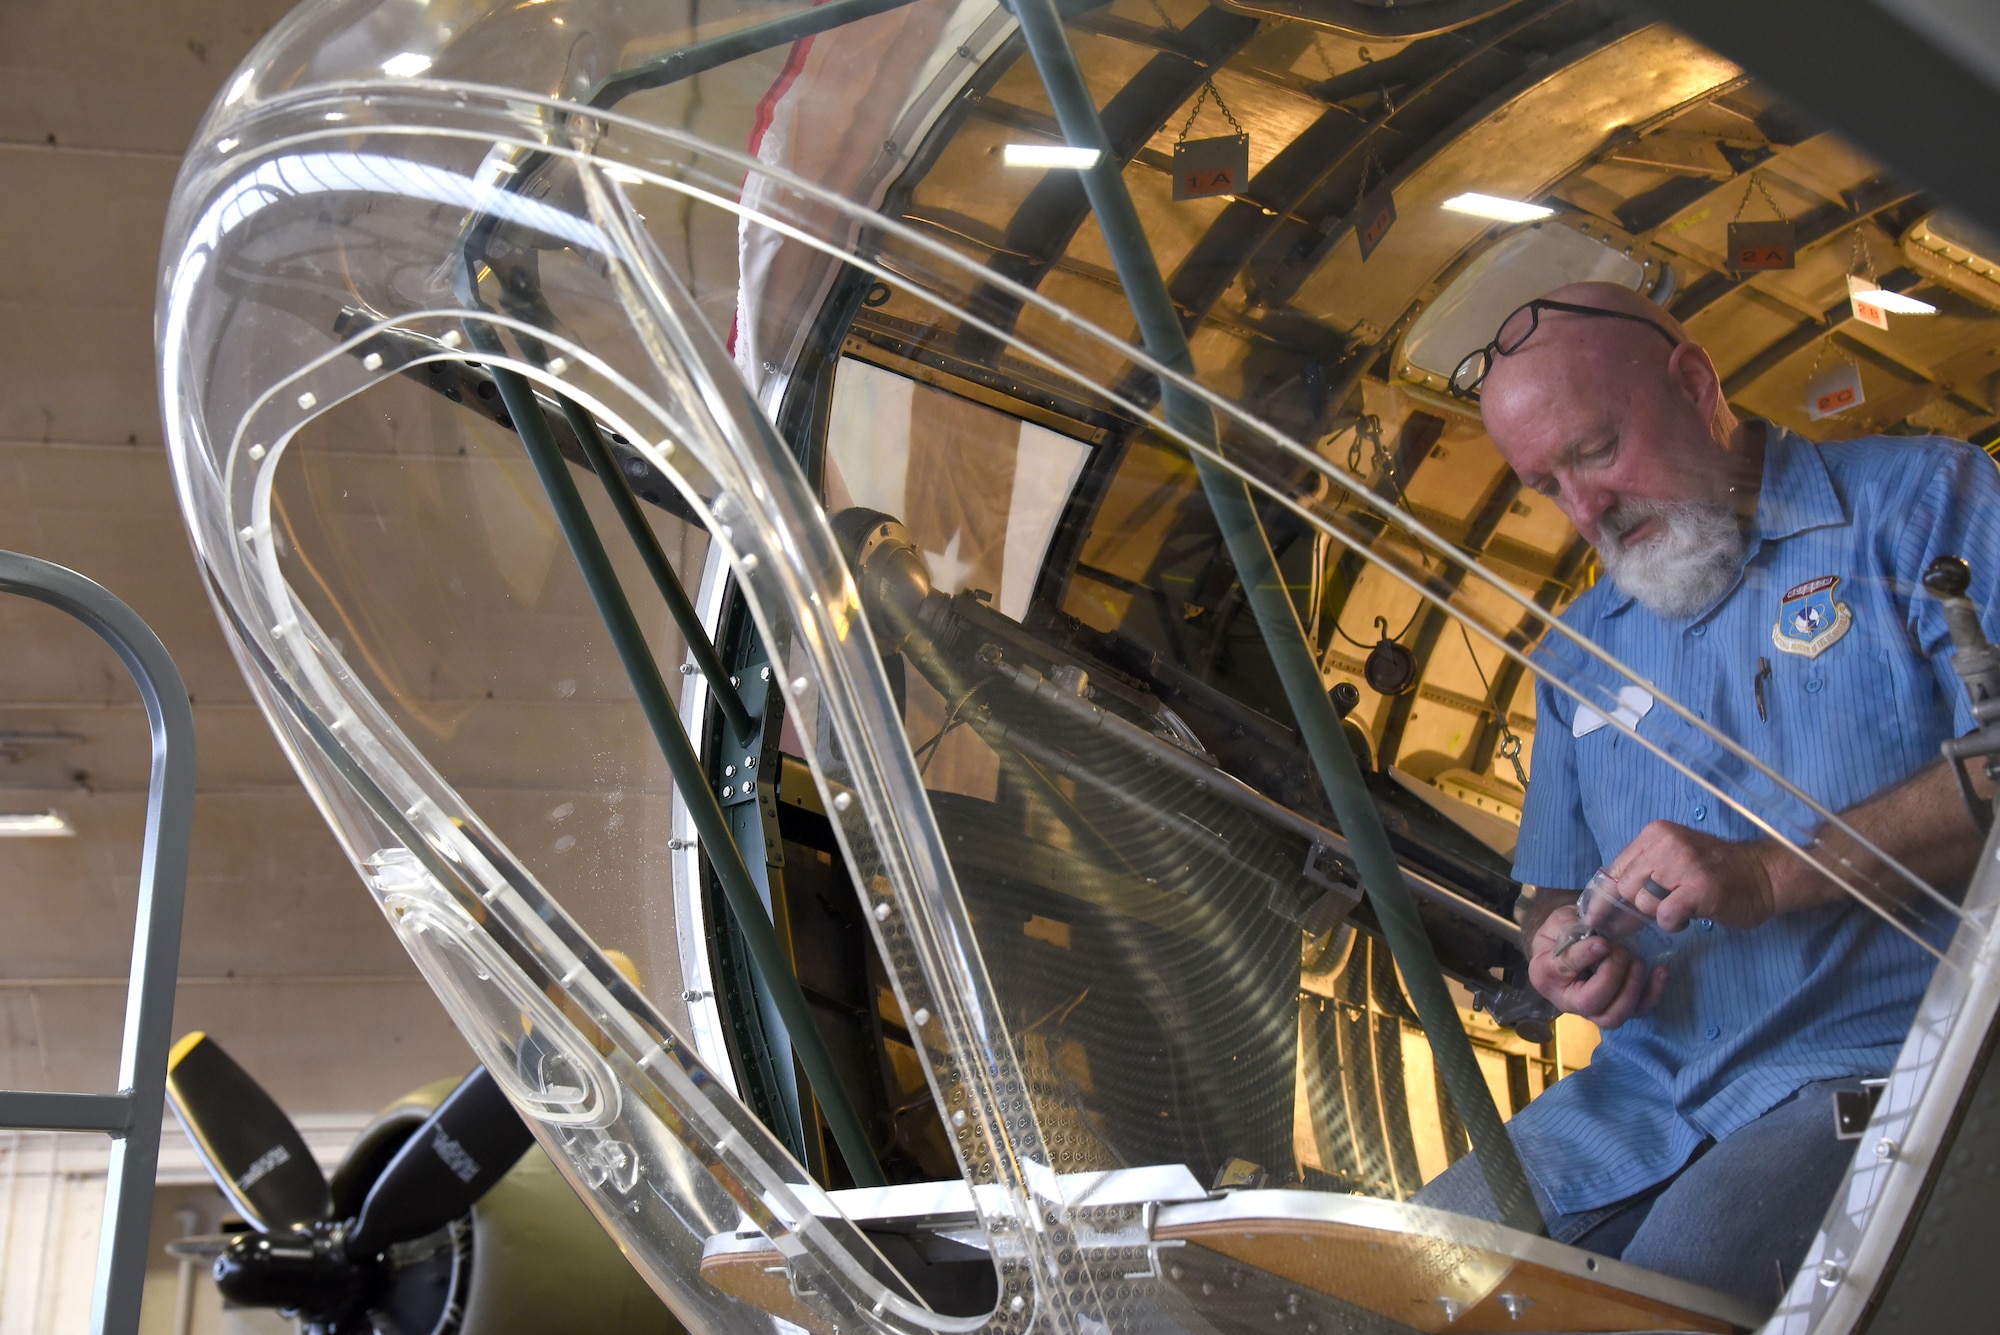 (03/06/2018) -- Museum restoration specialist Roger Brigner works on the bomb sight mount in the Boeing B-17F Memphis Belle. Plans call for the aircraft to be placed on permanent public display in the WWII Gallery here at the National Museum of the U.S. Air Force on May 17, 2018. (U.S. Air Force photo by Ken LaRock)